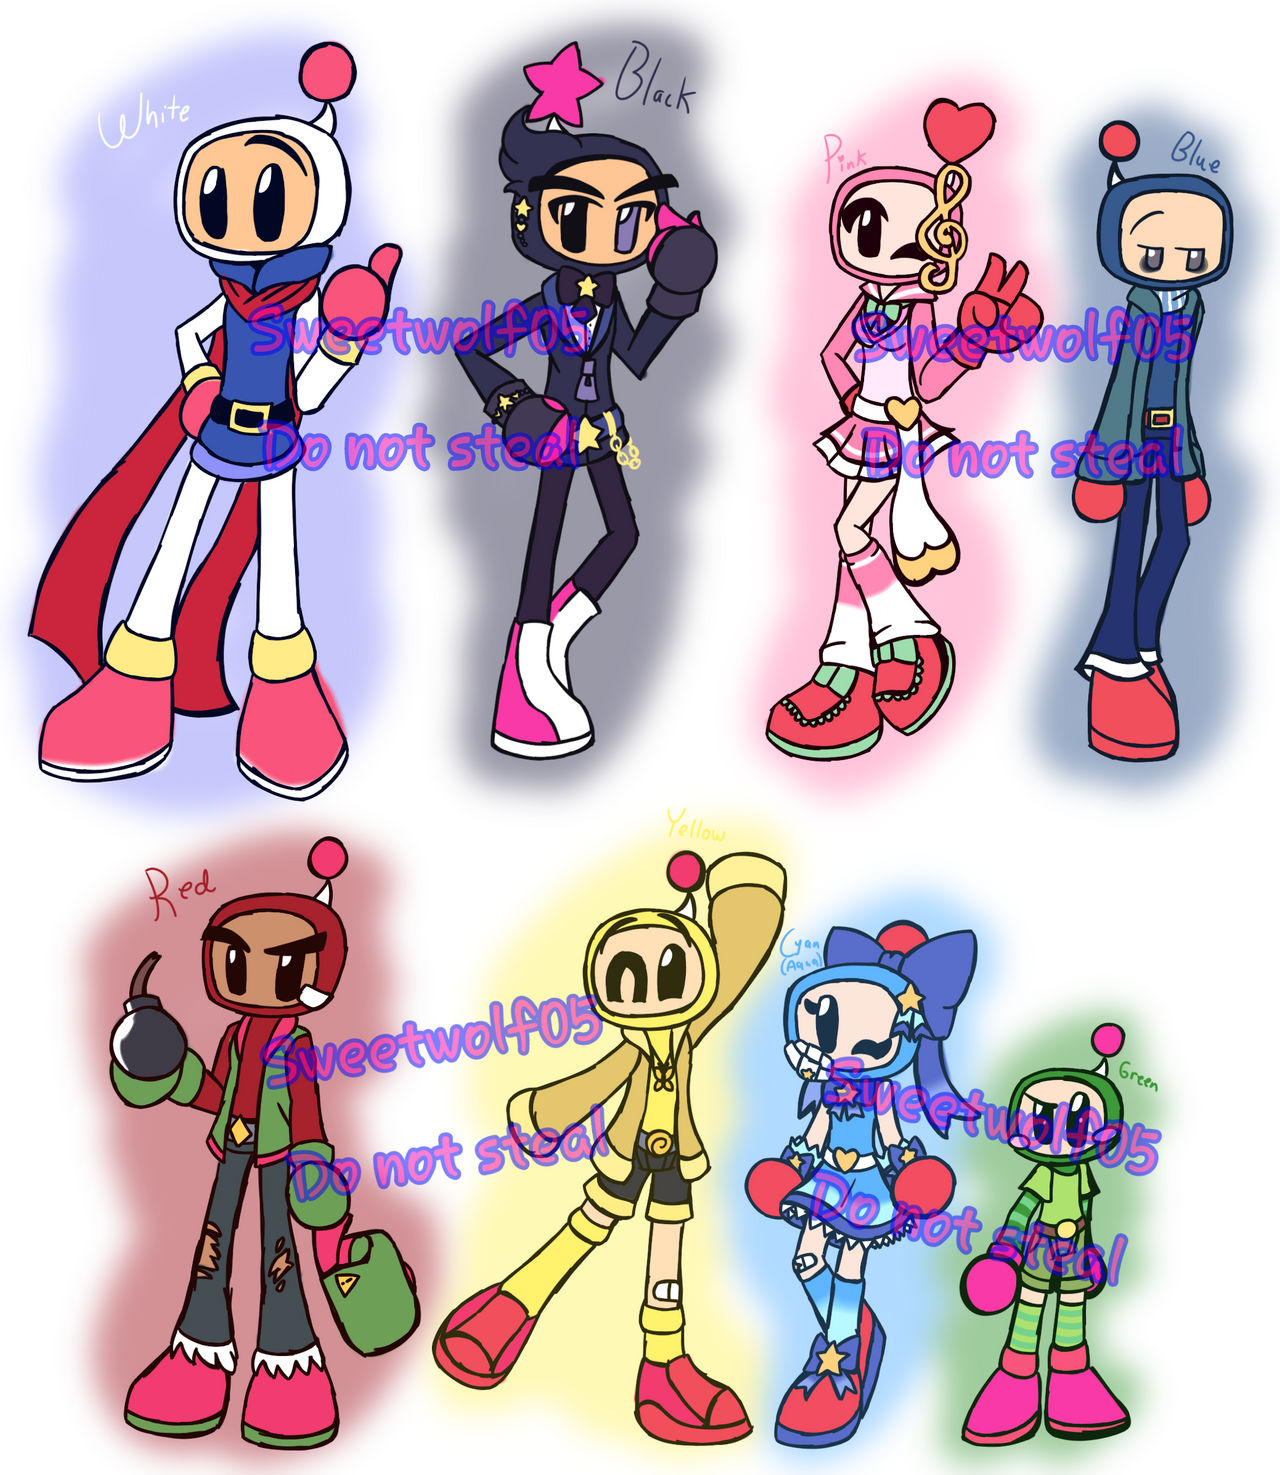 Bomberman Bros with Mouths by zmcdonald09 on DeviantArt